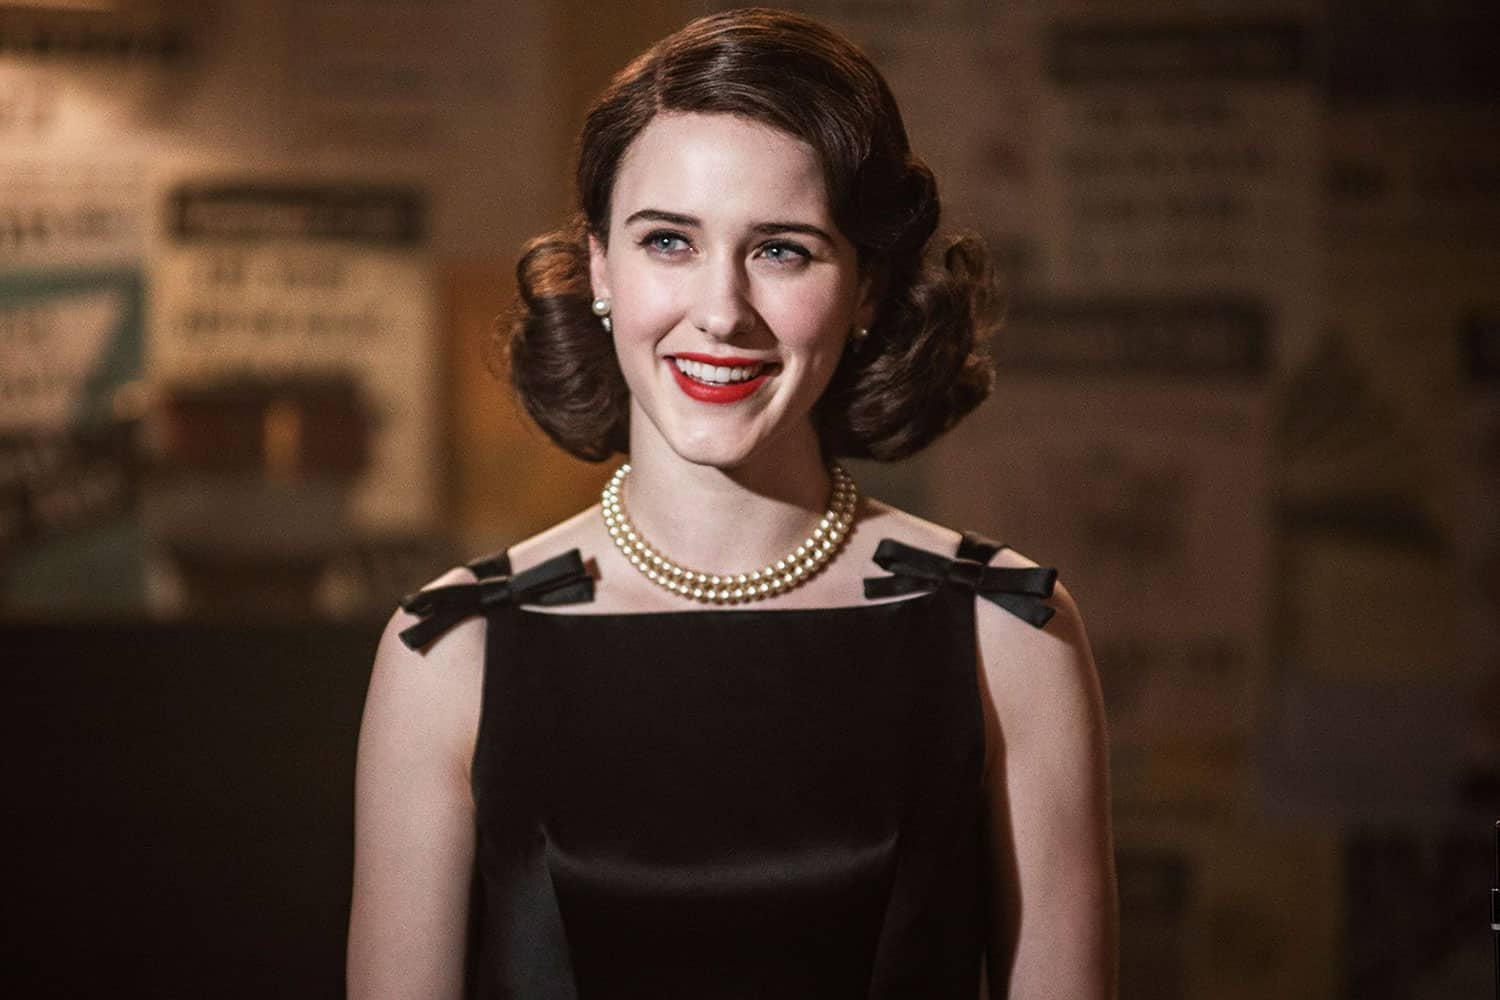 Season 3 of Amazon’s The Marvelous Mrs. Maisel Is More Epic Than Game of Th...